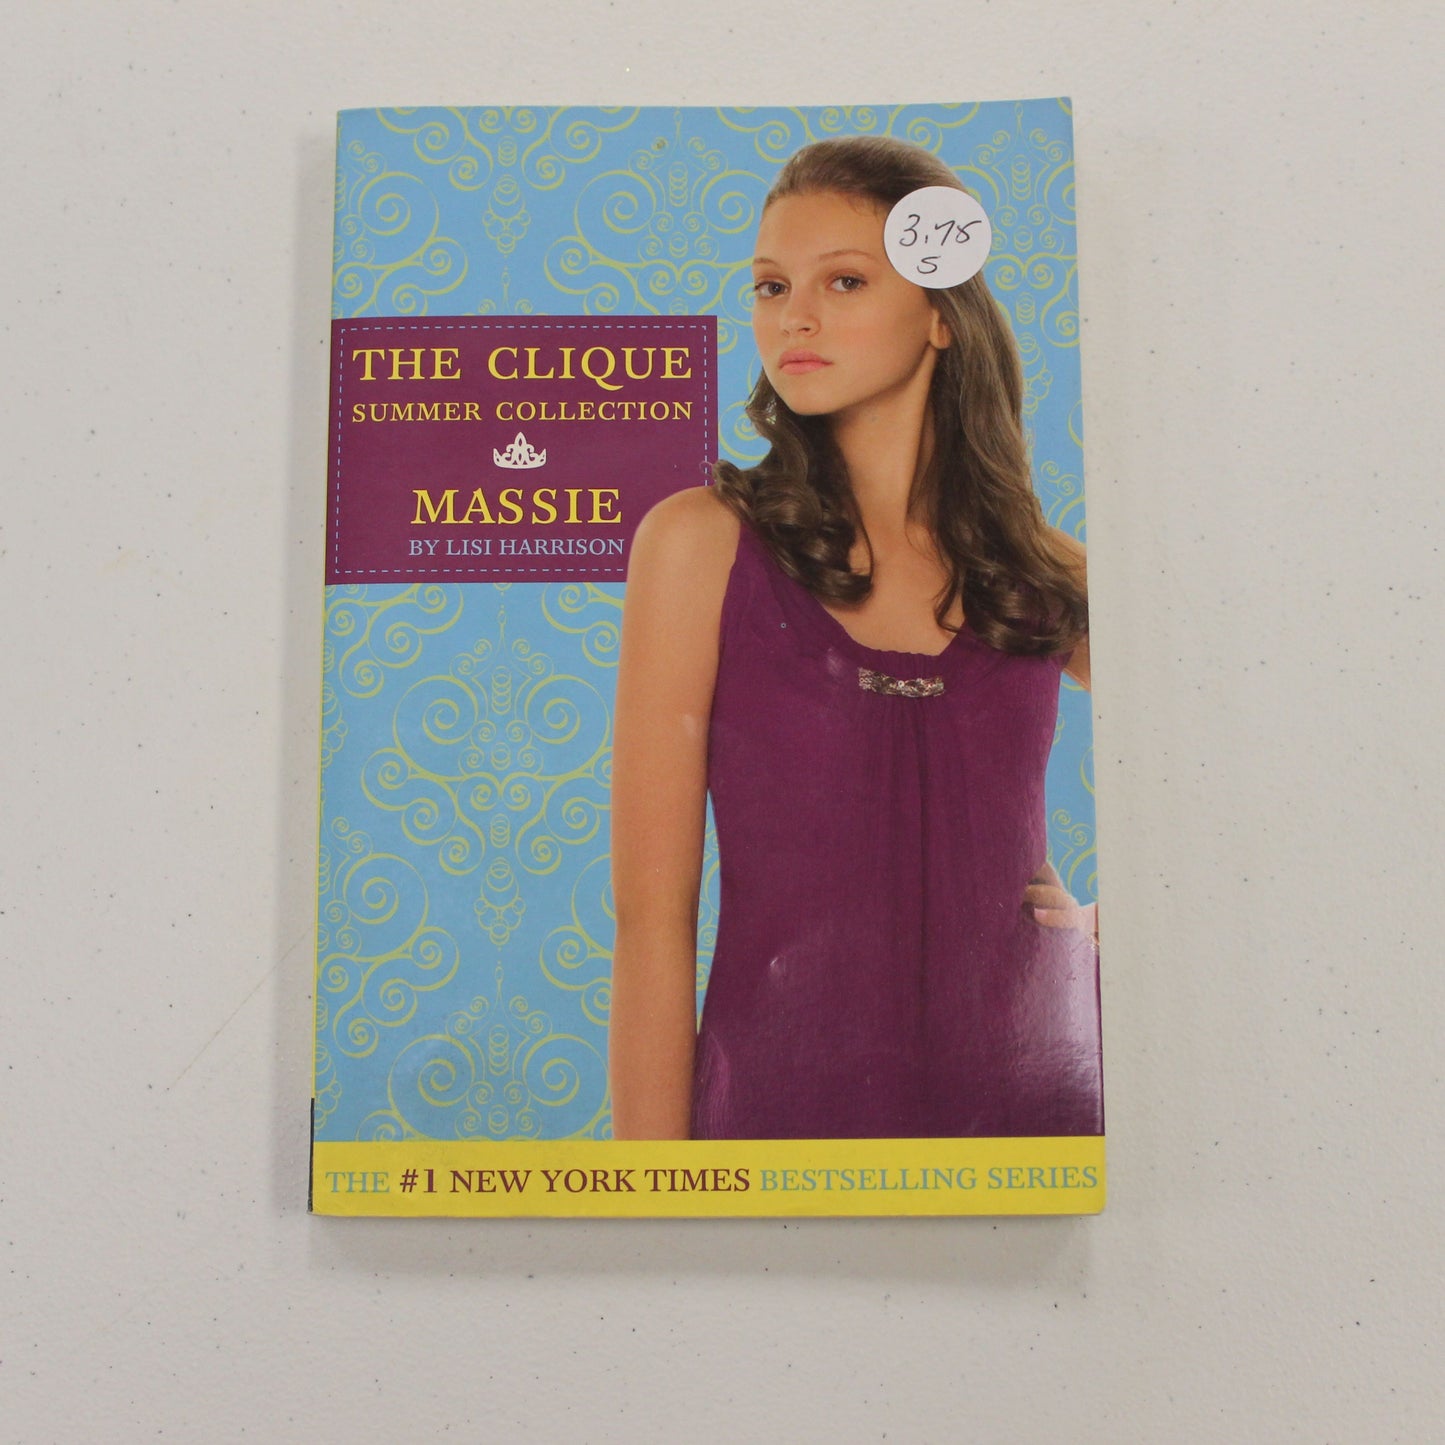 THE CLIQUE SUMMER COLLECTION: MASSIE